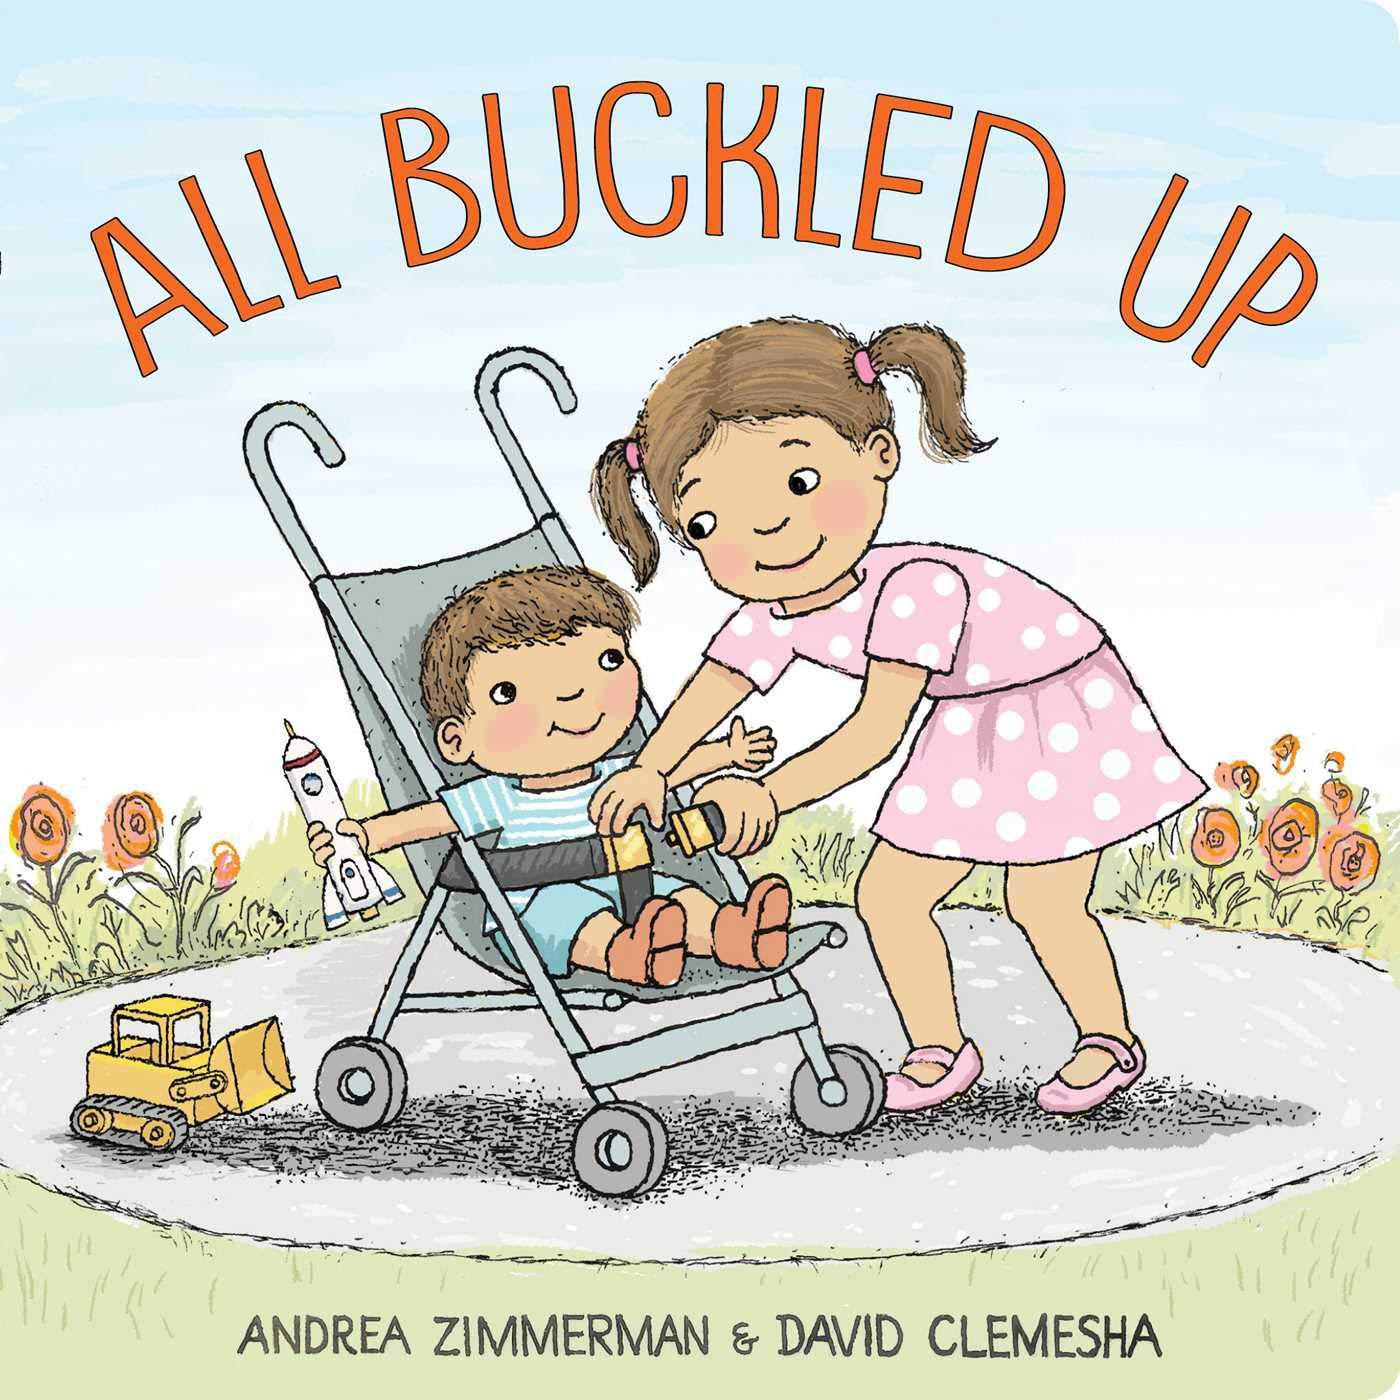 Book (Board) - All Buckled Up